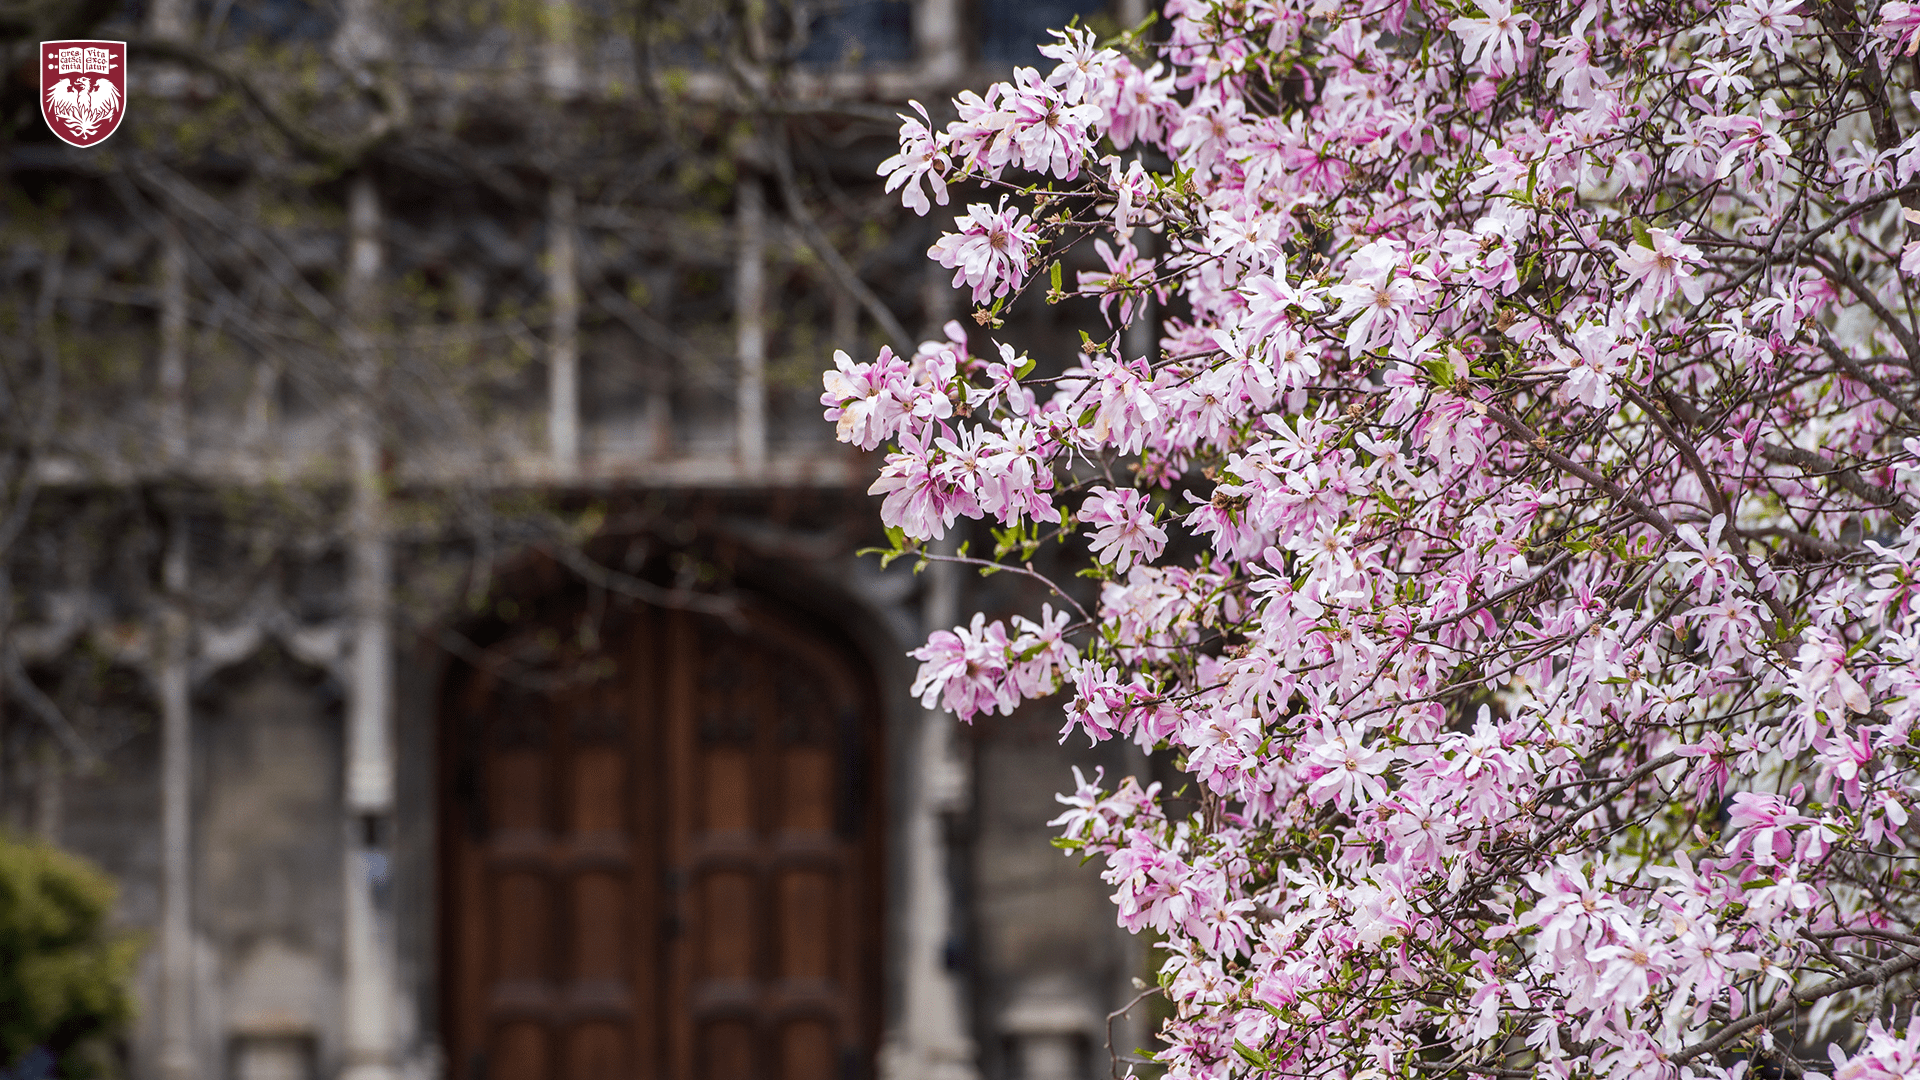 Pink flowers on tree branches with a gothic stone building and wooden door in the background